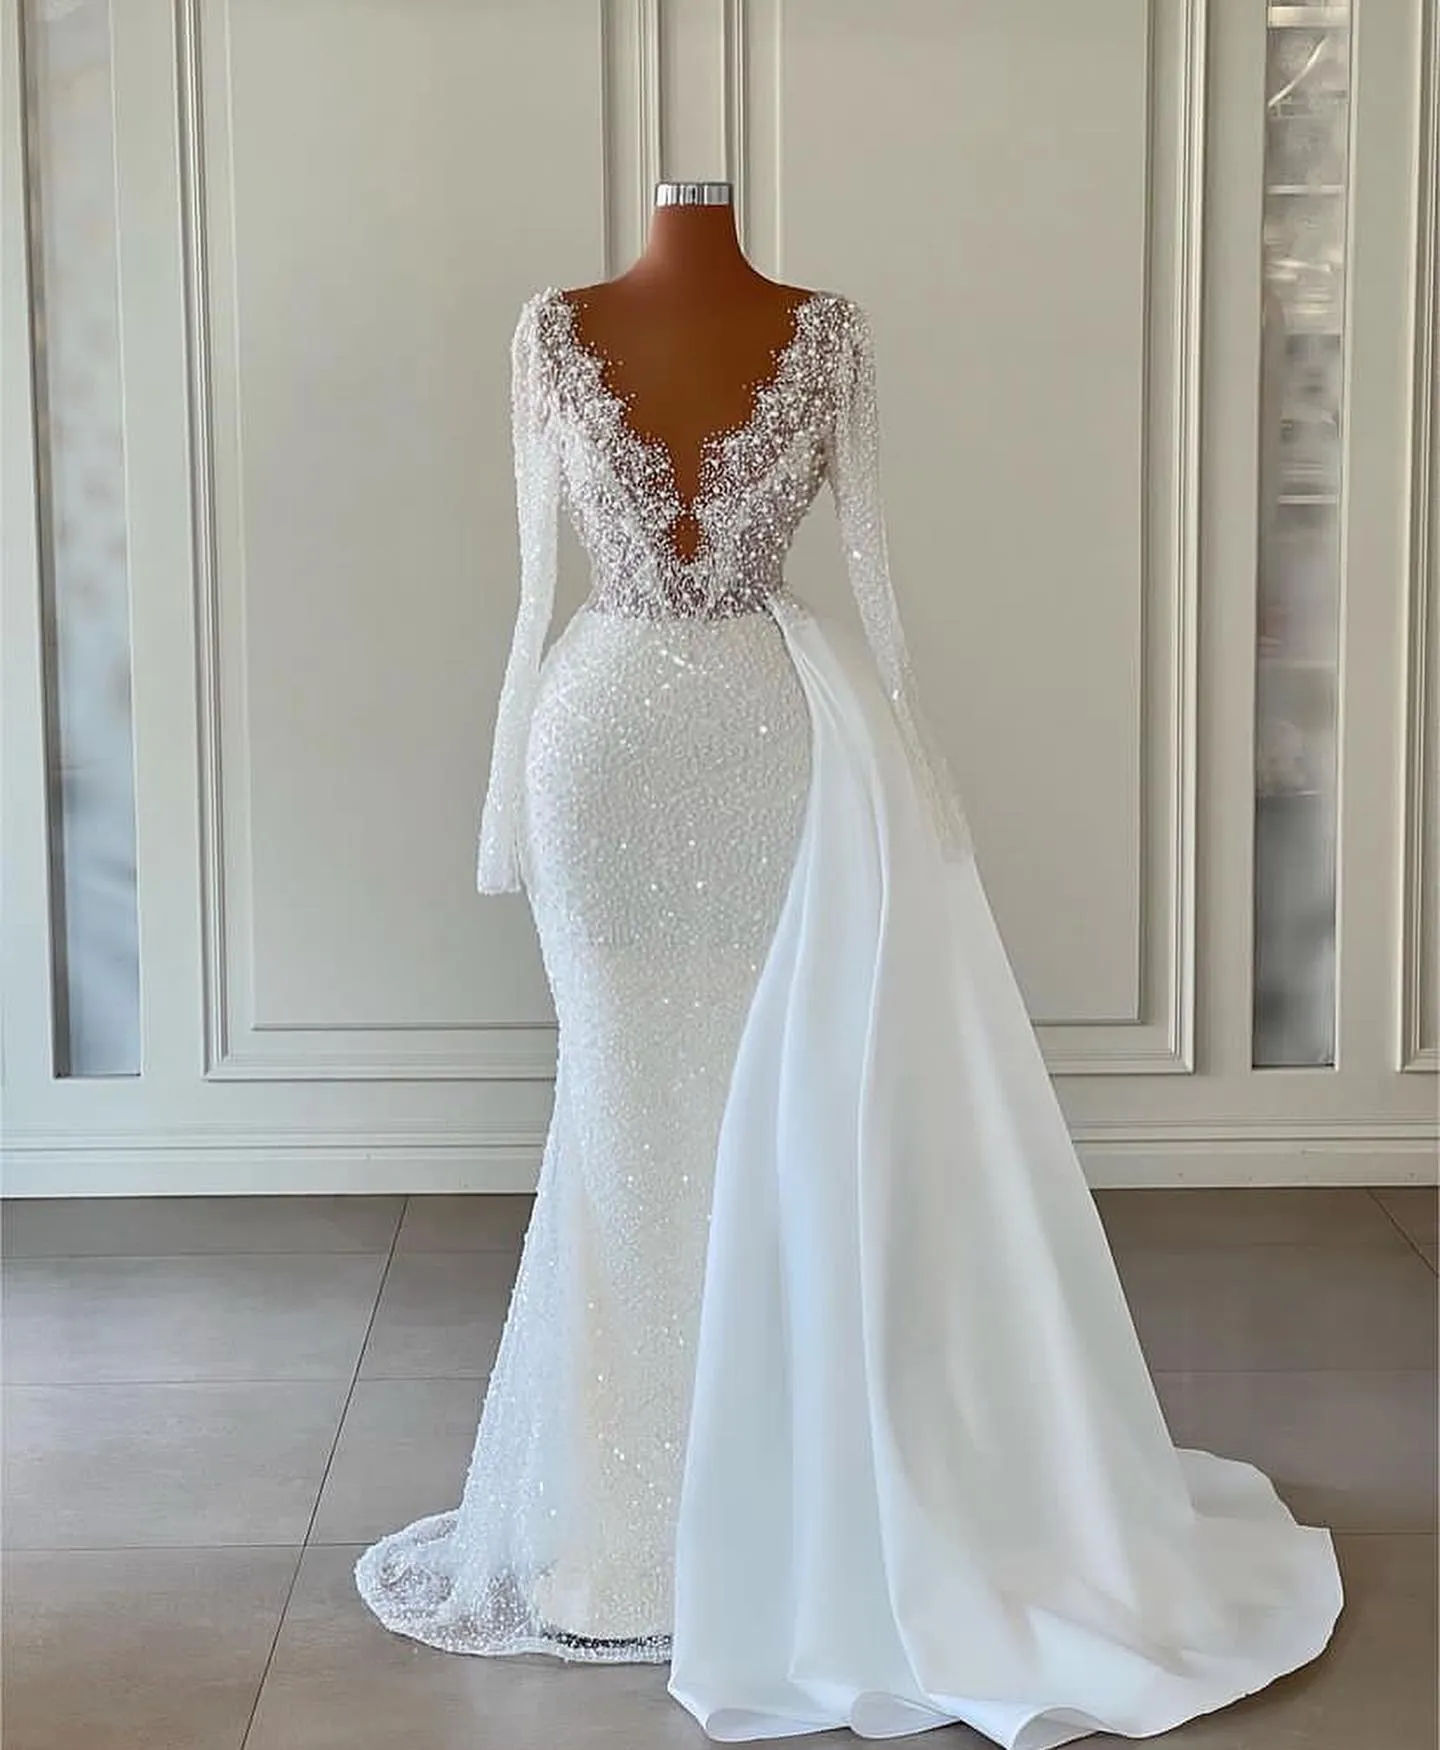 Sexy Sparkly Mermaid Wedding Dress Pearls Beading Sheer V Neck Long Sleeve Beads Bridal Gowns Robe De Soiree